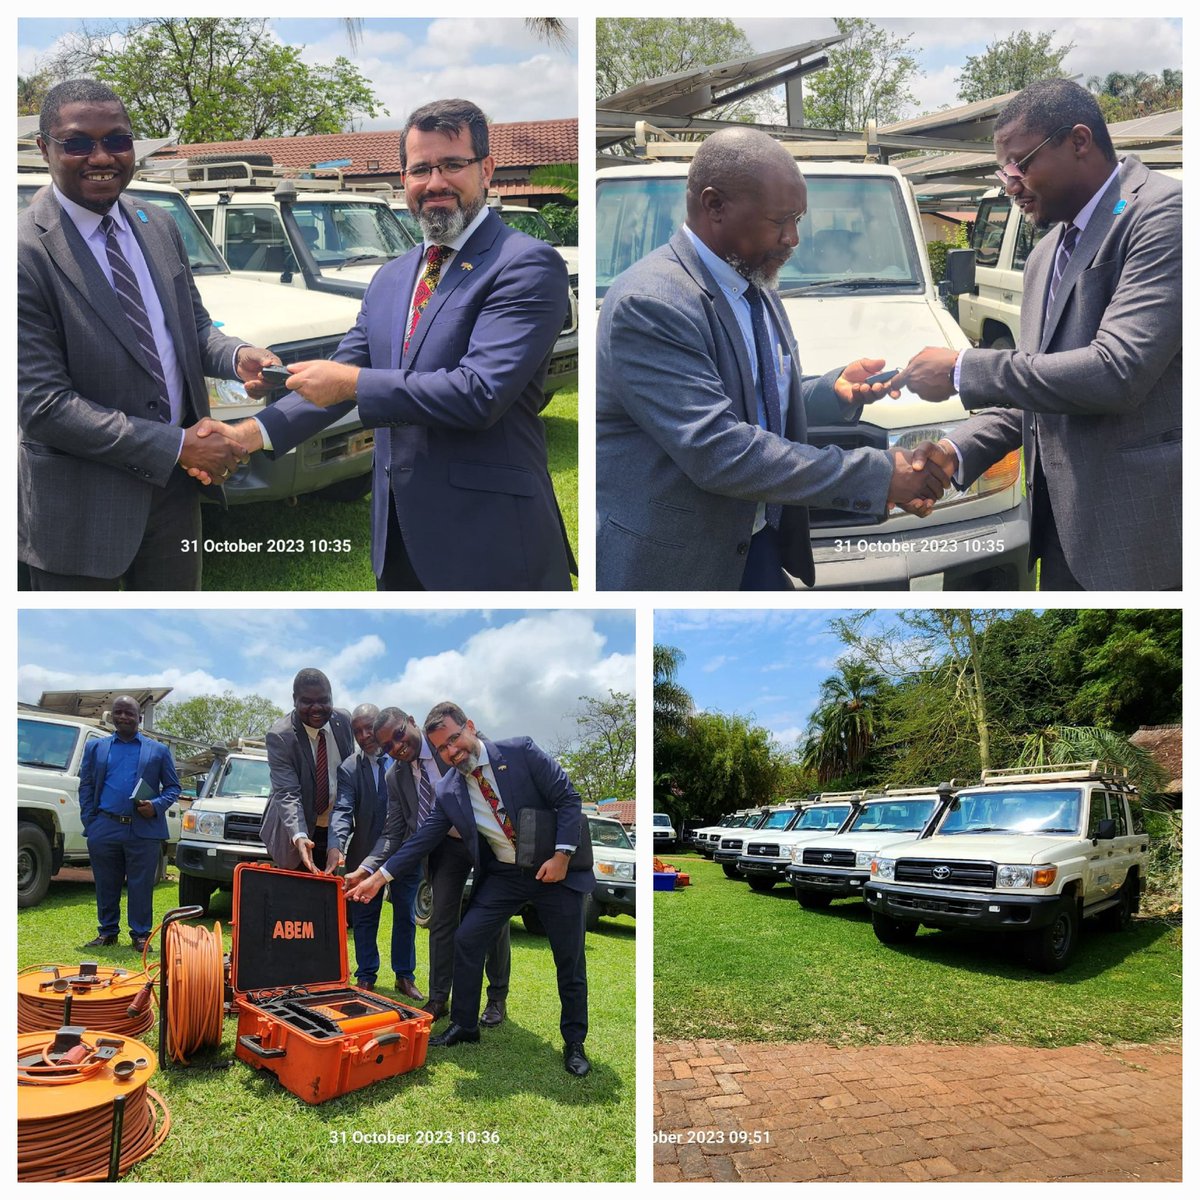 The Rural #WASH Programme funded by @UKinZimbabwe, provided 4.48 million ppl access to drinking water & made 3,324 villages #OpenDefecationFree. Today, @UNICEFZIMBABWE handed-over 15 additiinal vehicles & 2 Teratometers to support the sector. @MoLAFWRD_Zim @ministry_local #RIDA.